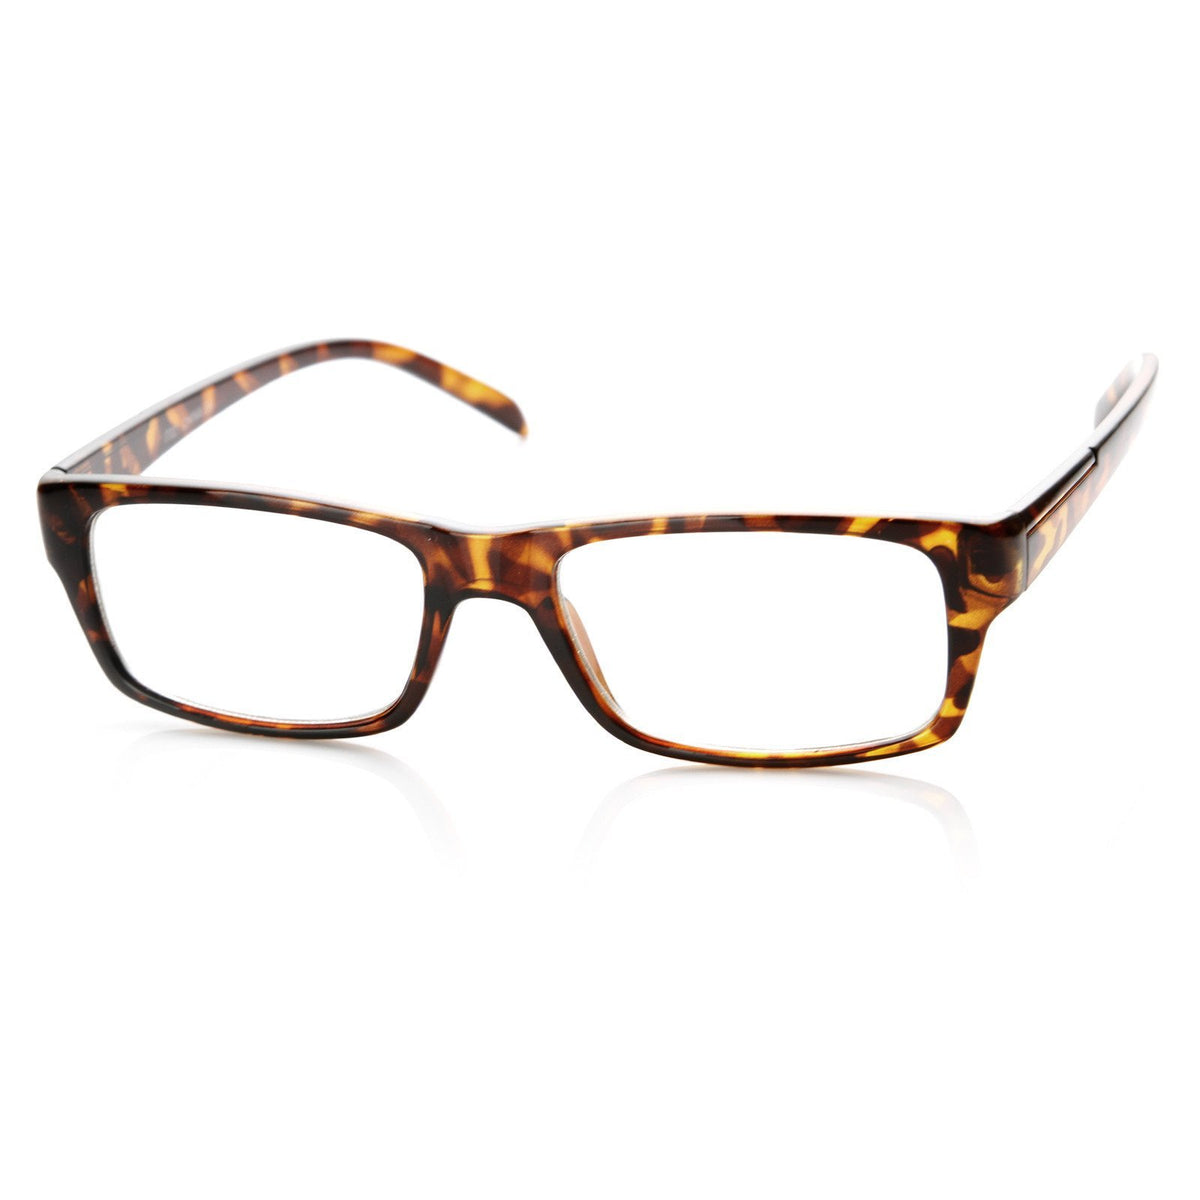 New Square Optical Frame Clear Lens Fashion Glasses